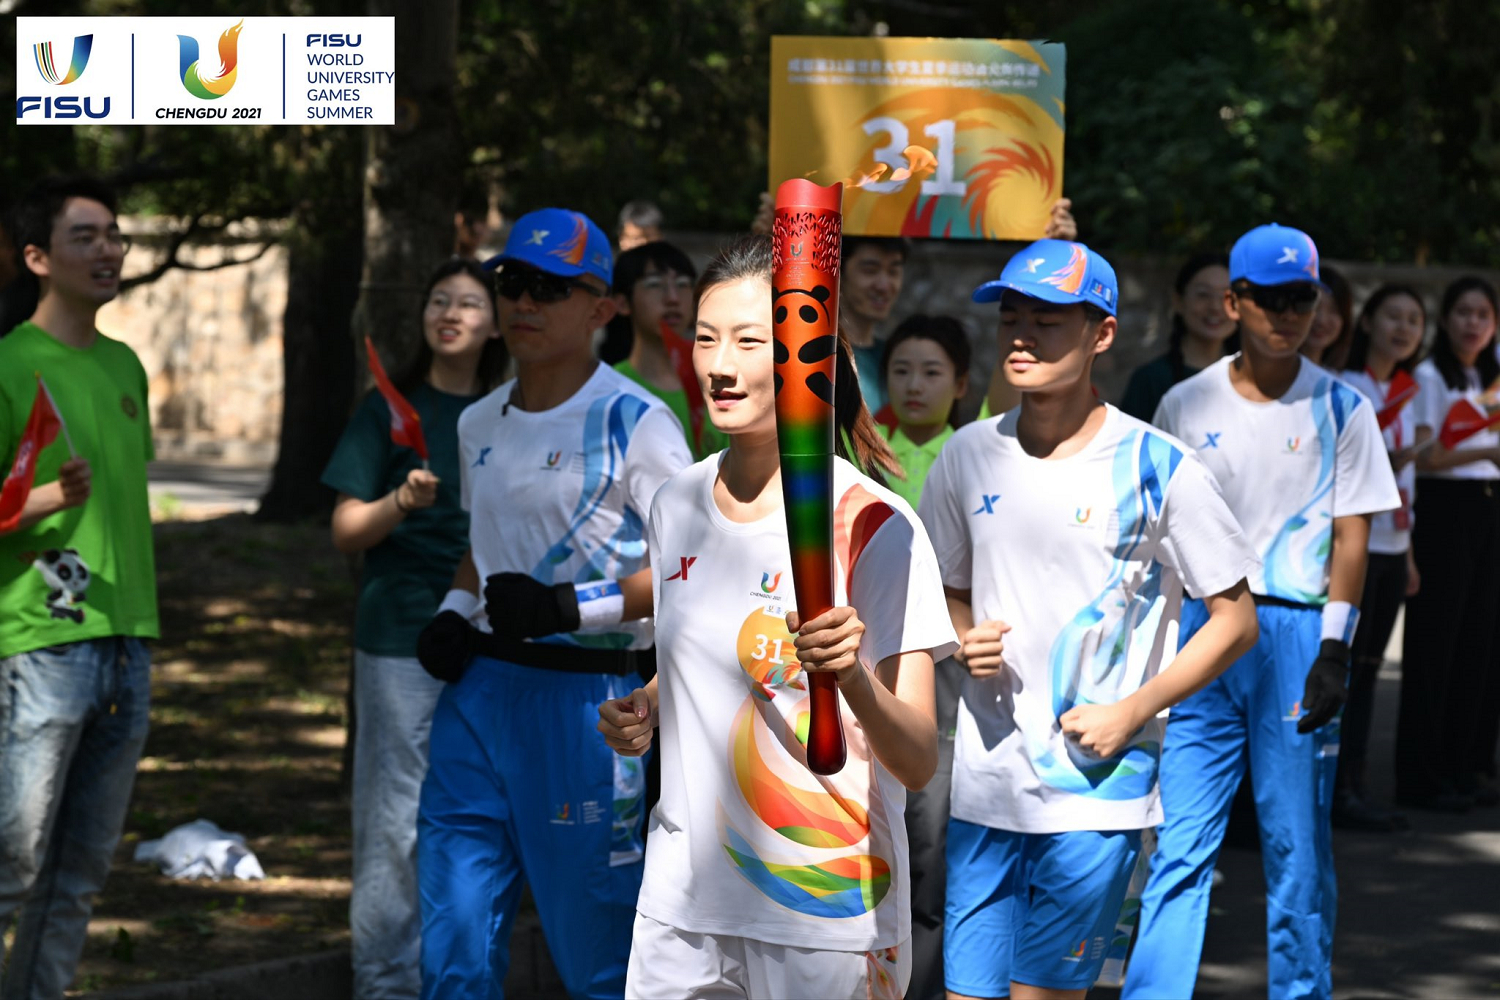   A Chinese student carries the Summer World University Games torch and runs down tree-lined a city road.